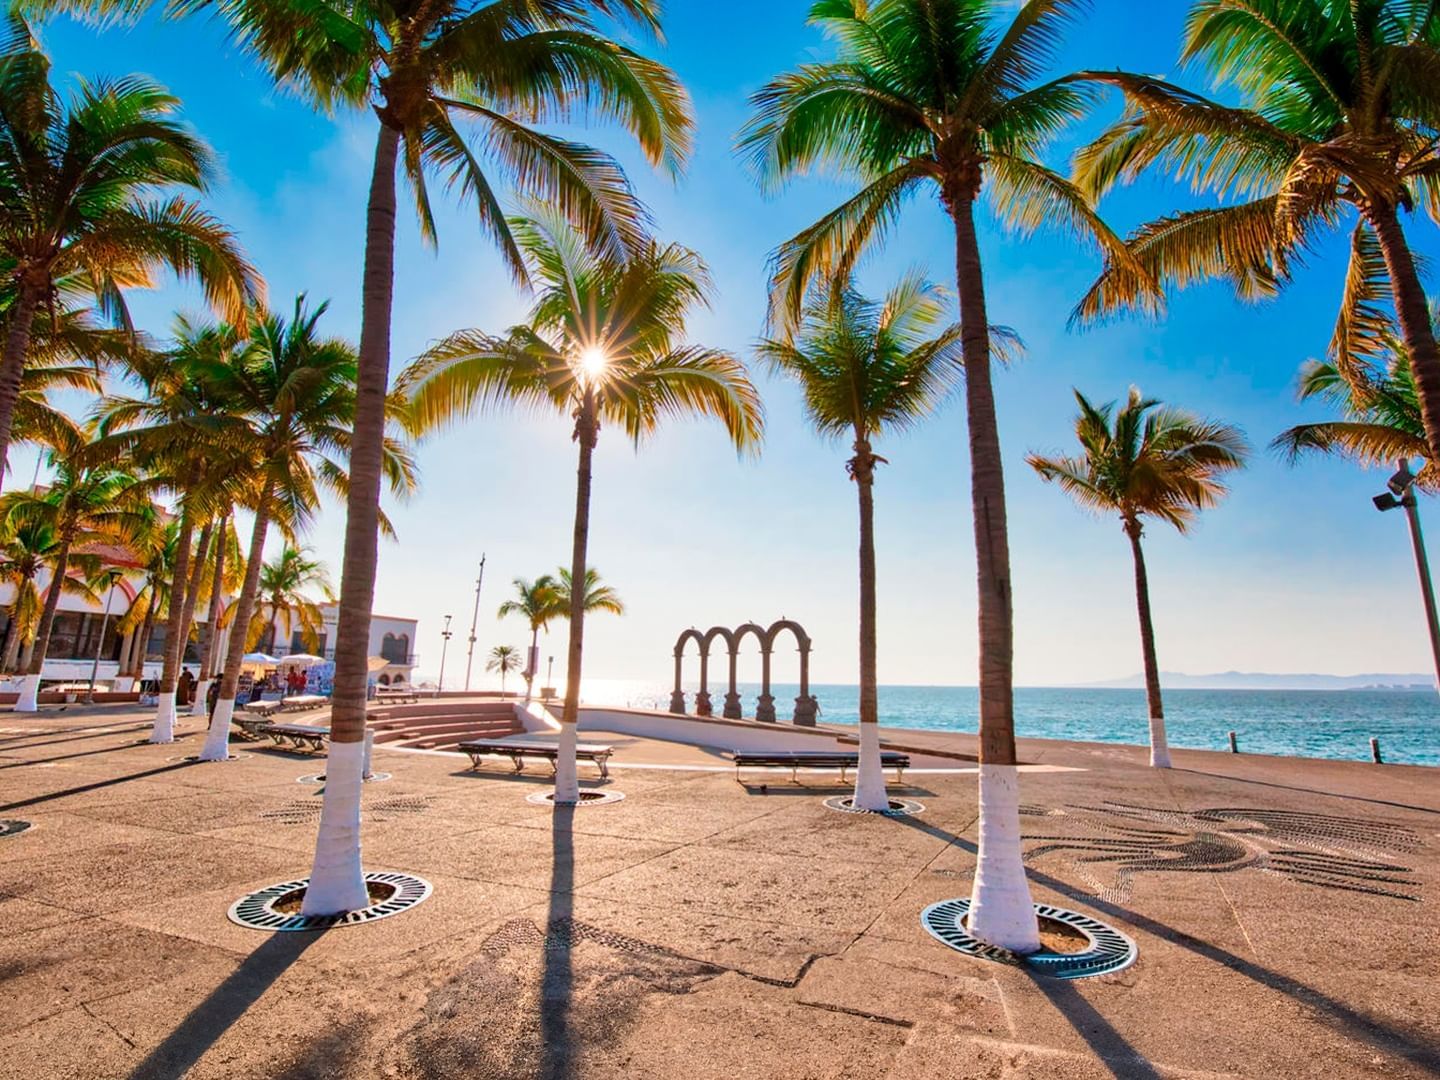 Palm trees lining the beach in front of a building in Puerto Vallarta Malecon near Plaza Pelicanos Club Beach Resort